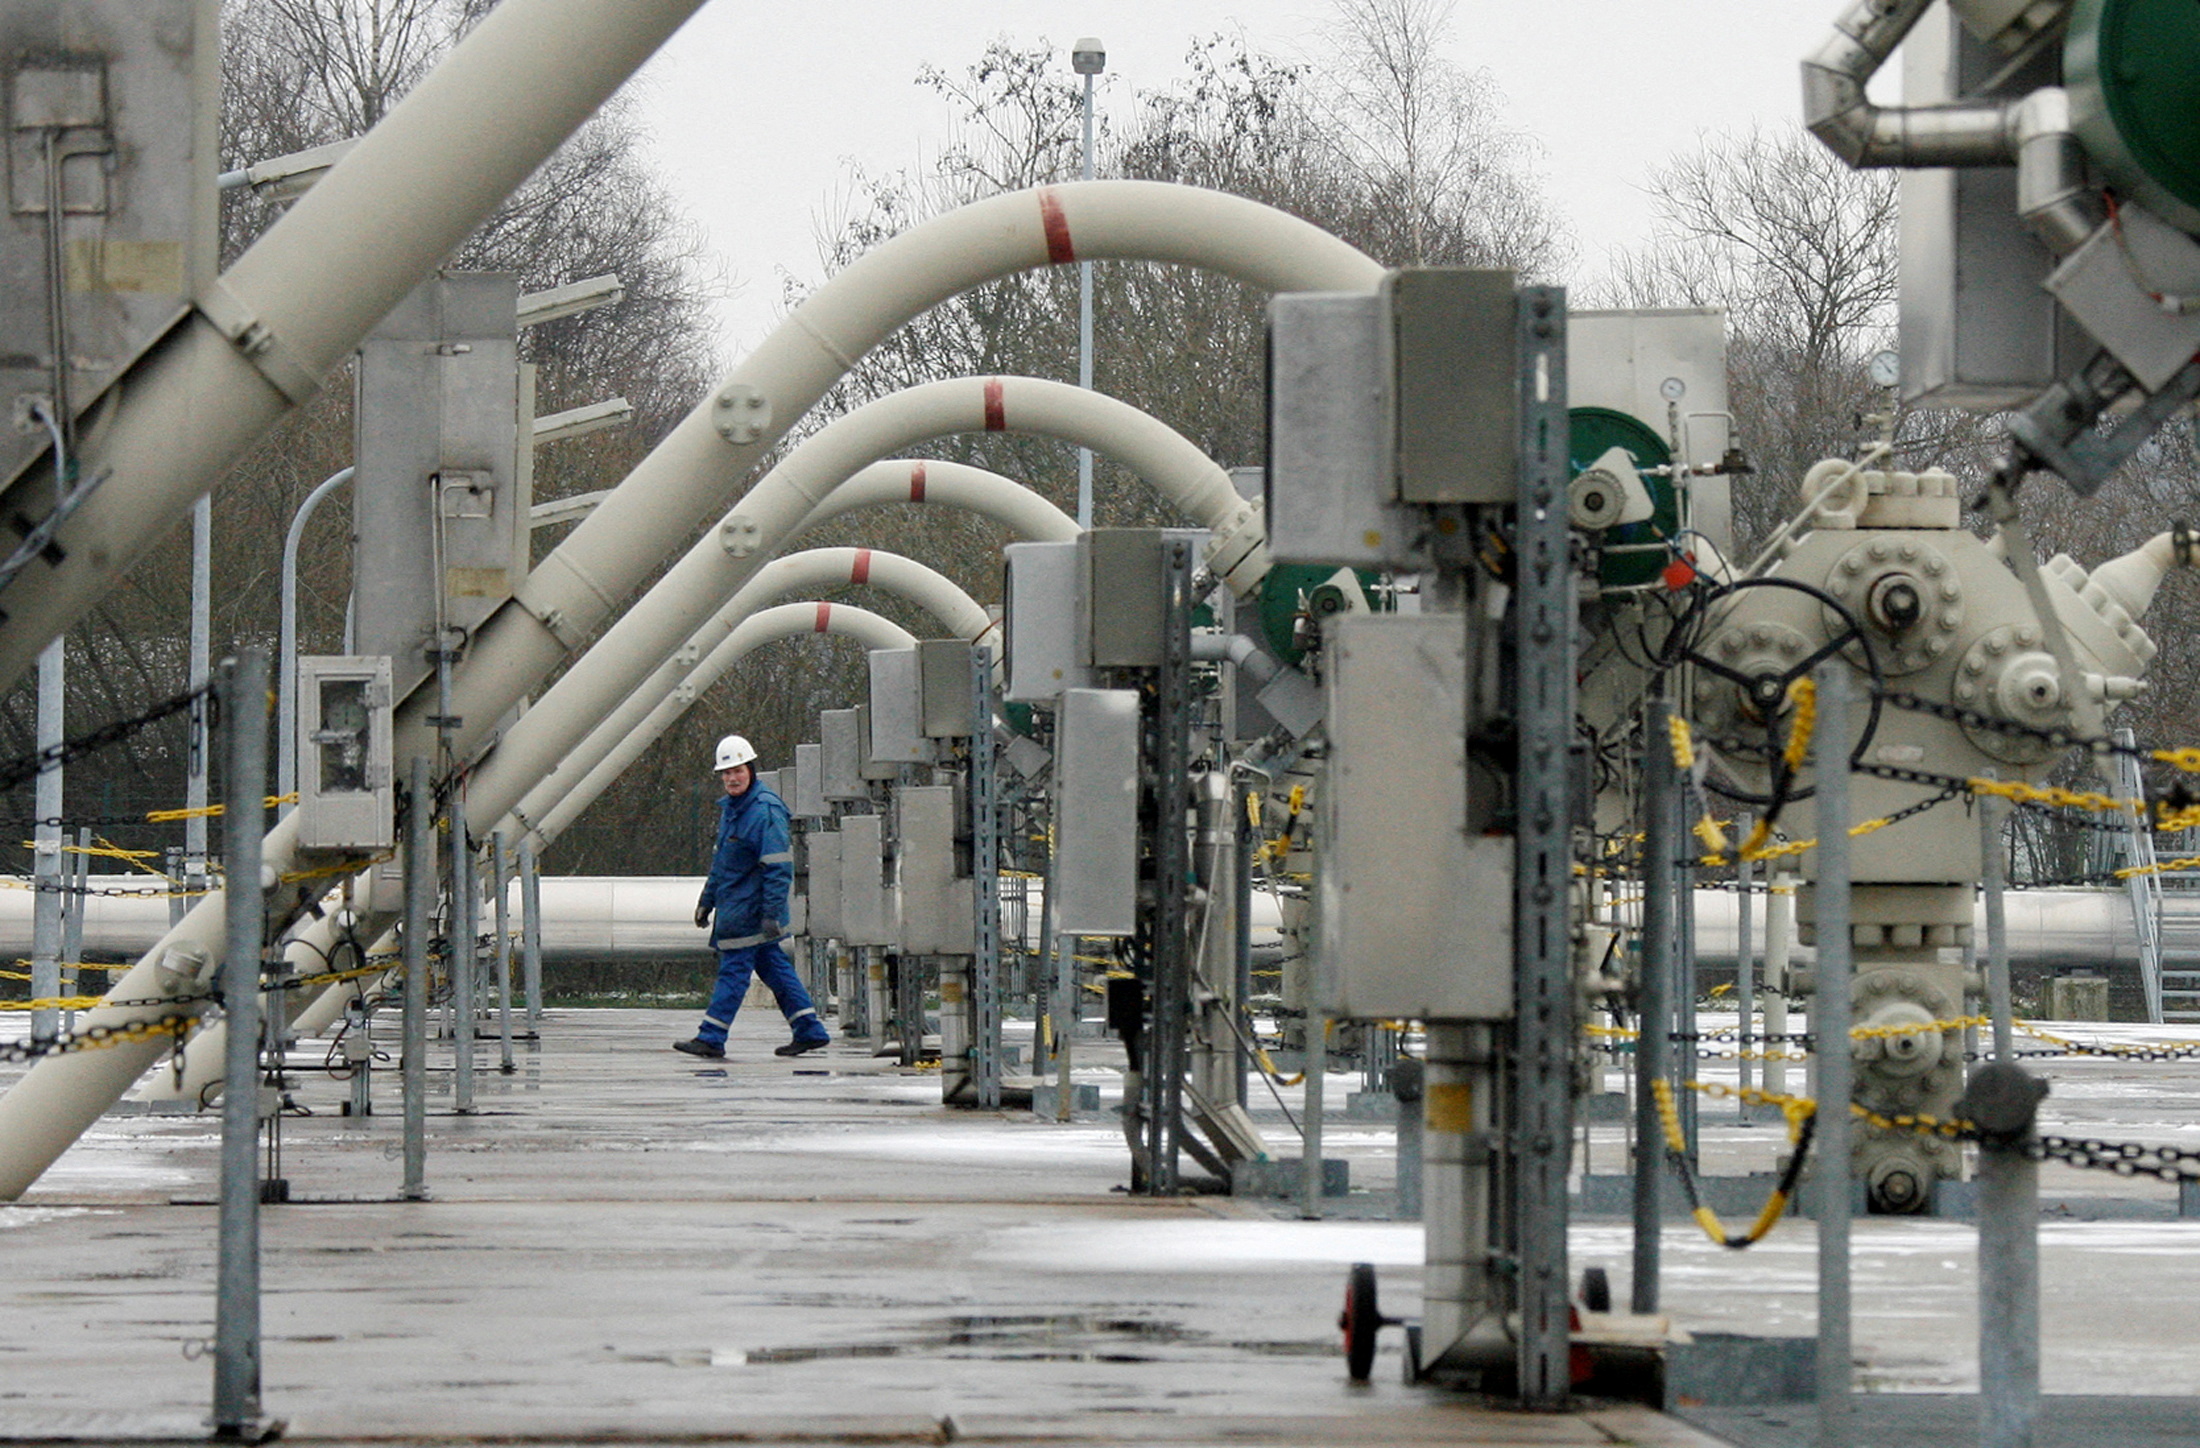 A technician walks between flow lines at the WINGAS gas storage facility in Rehden